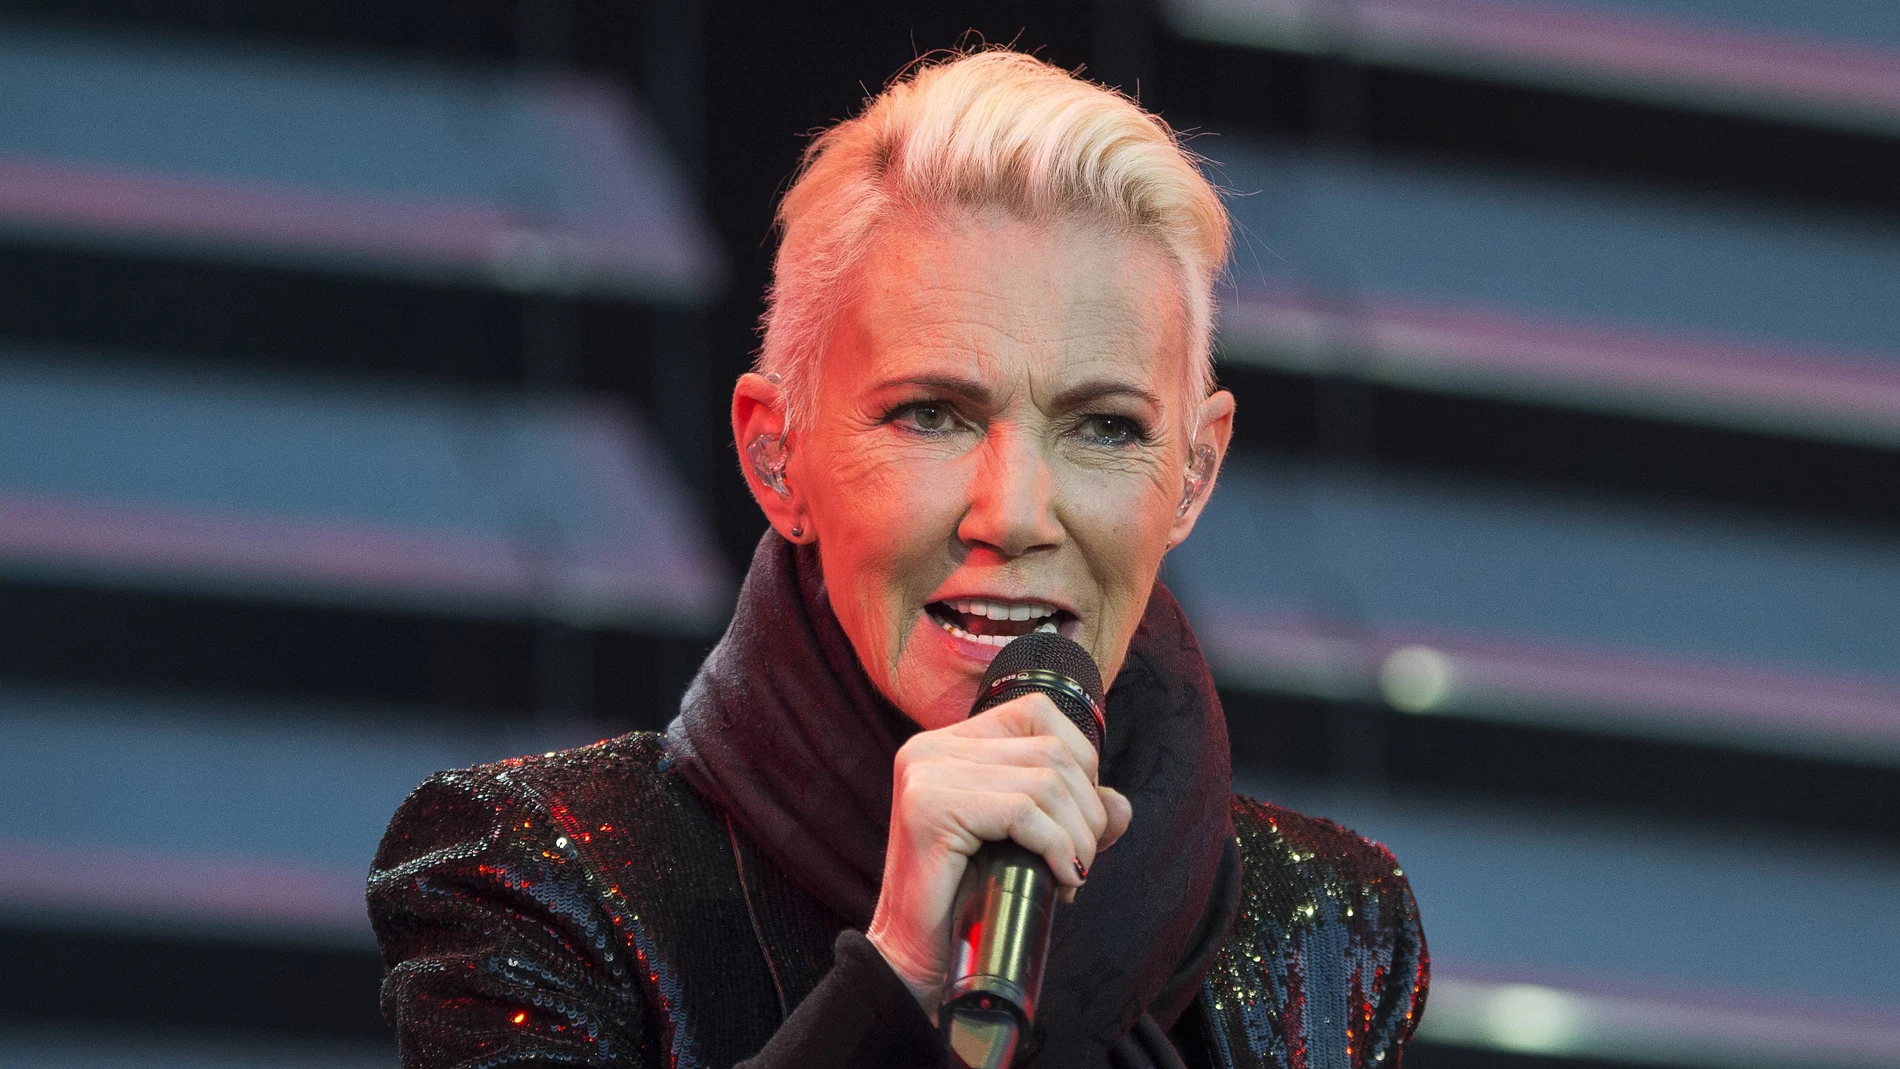 FILE - In this file photo dated July 18, 2015, Marie Fredriksson, singer of the pop duo Roxette. Fredriksson has died, aged 61 after a long illness, according to an announcement Tuesday Dec. 10, 2019. (Suvad Mrkonjic / TT via AP)